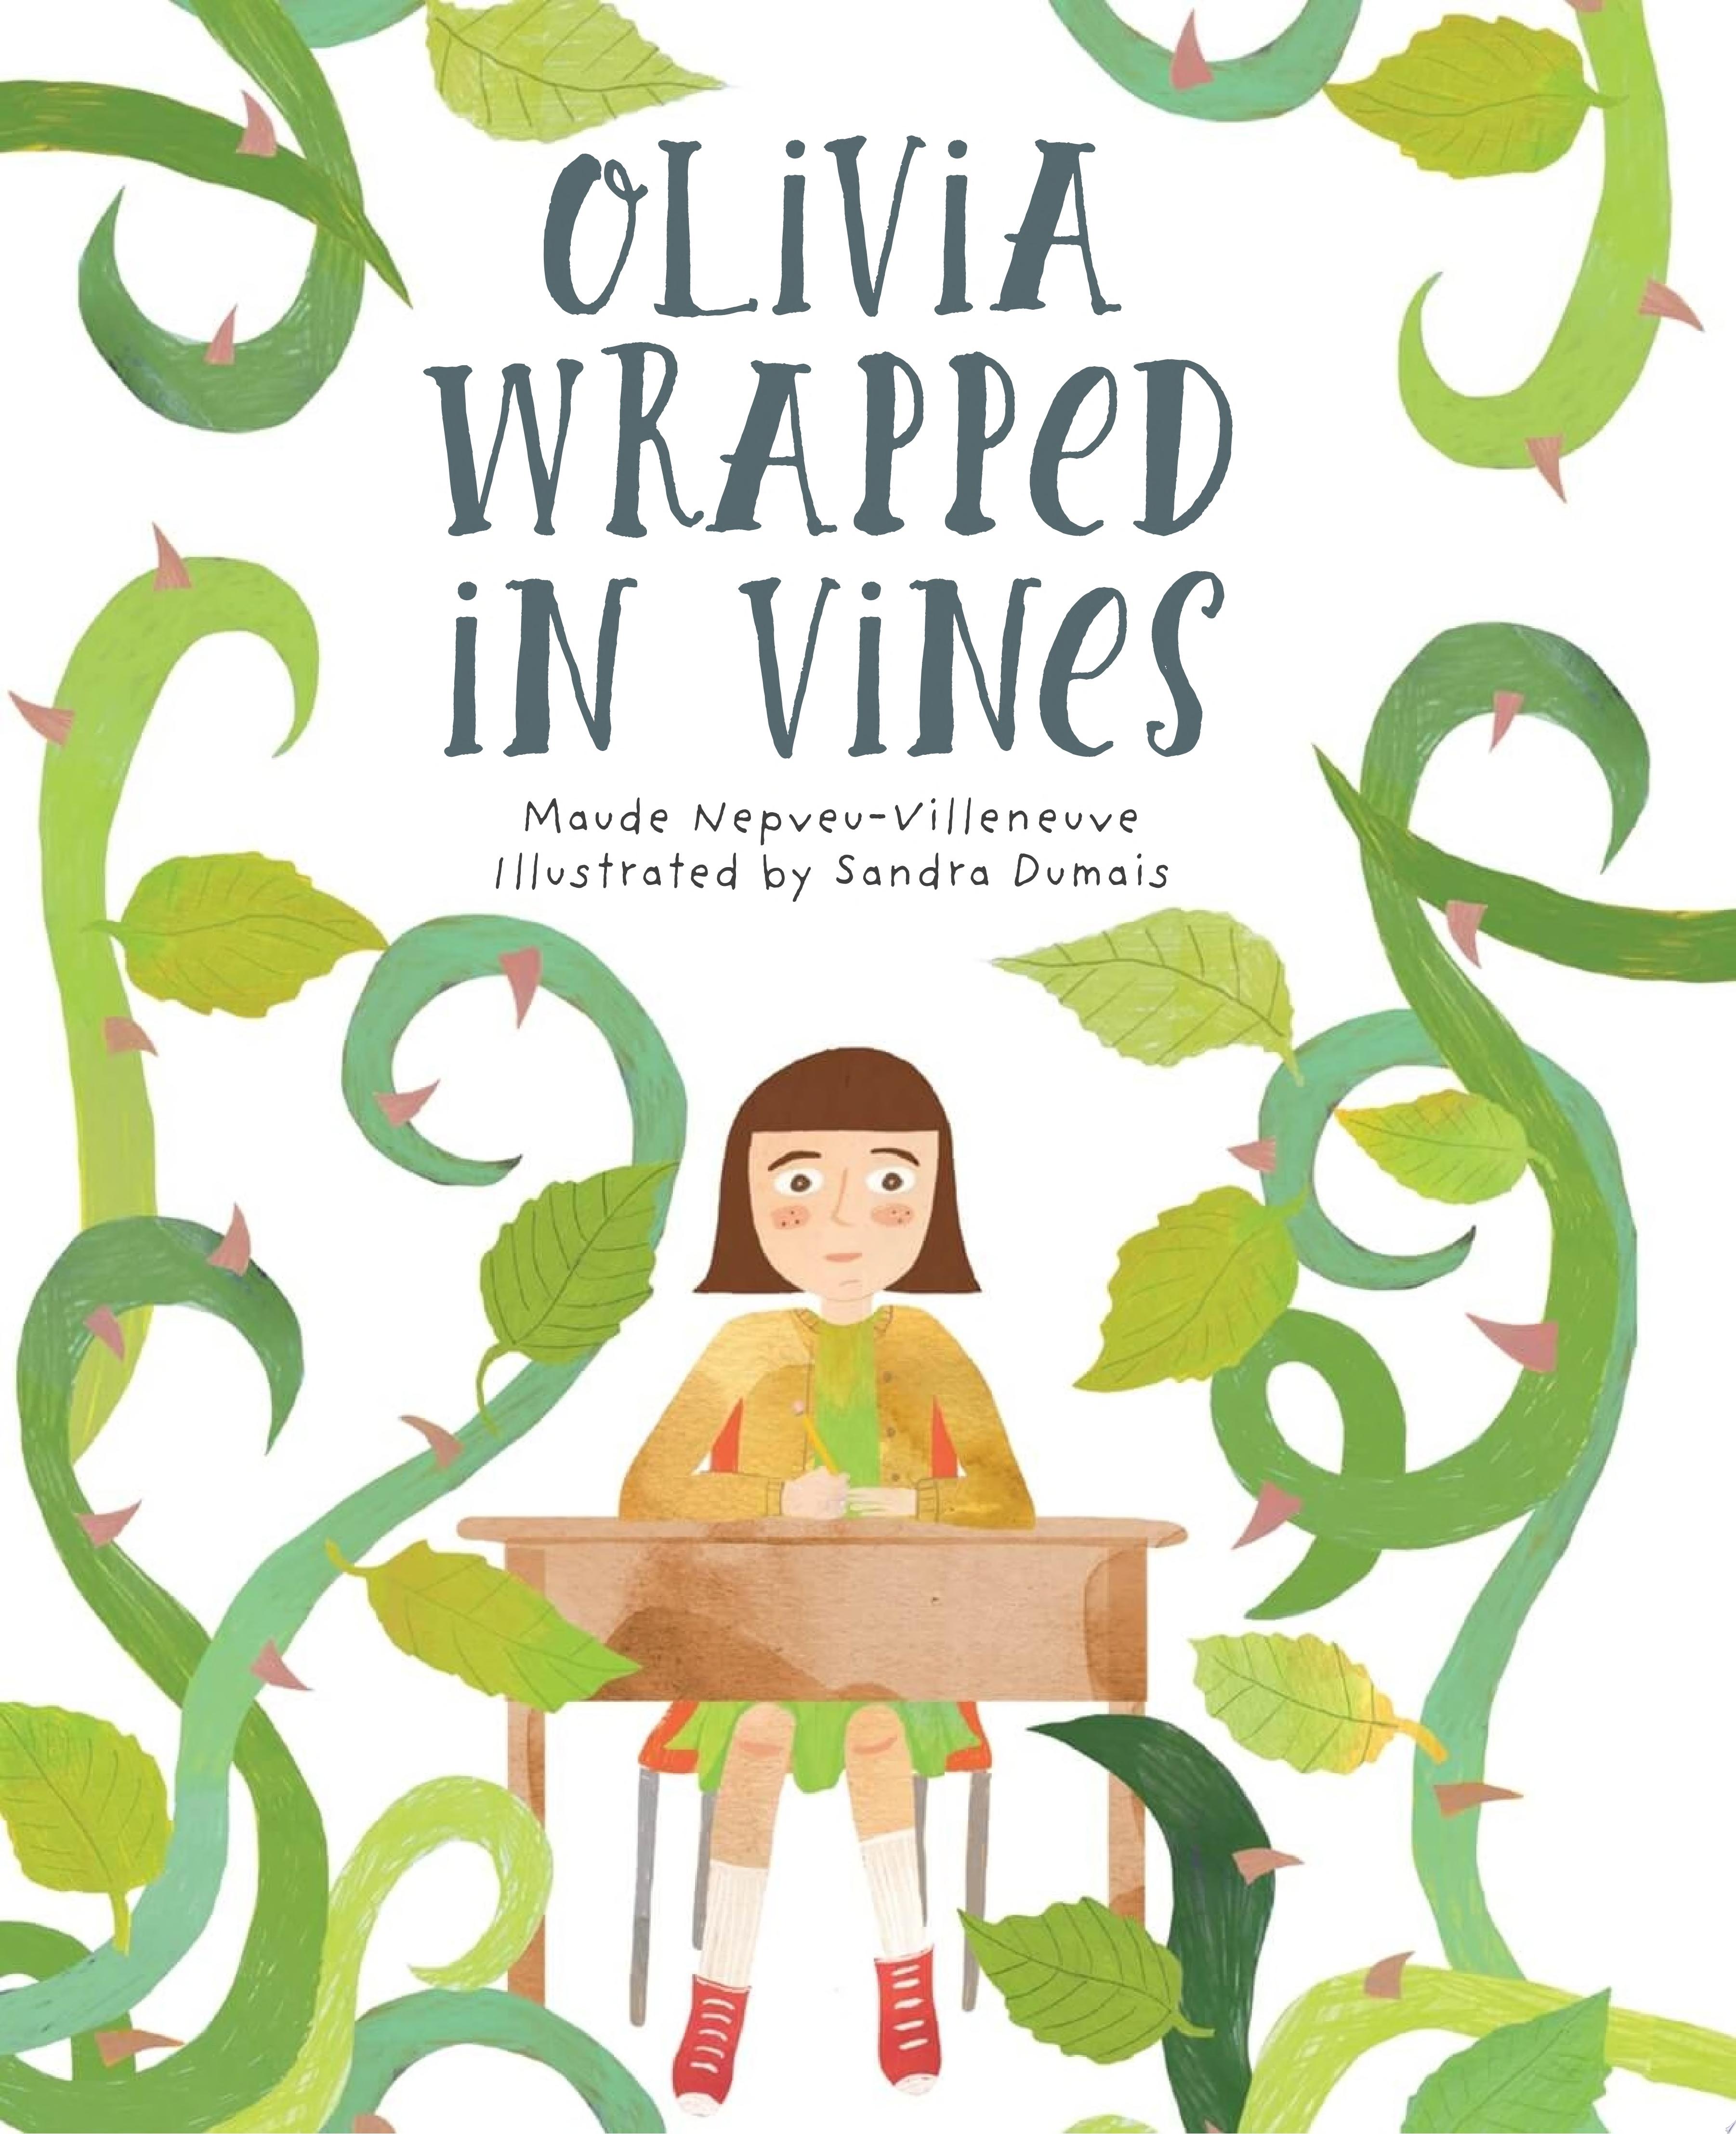 Image for "Olivia Wrapped in Vines"